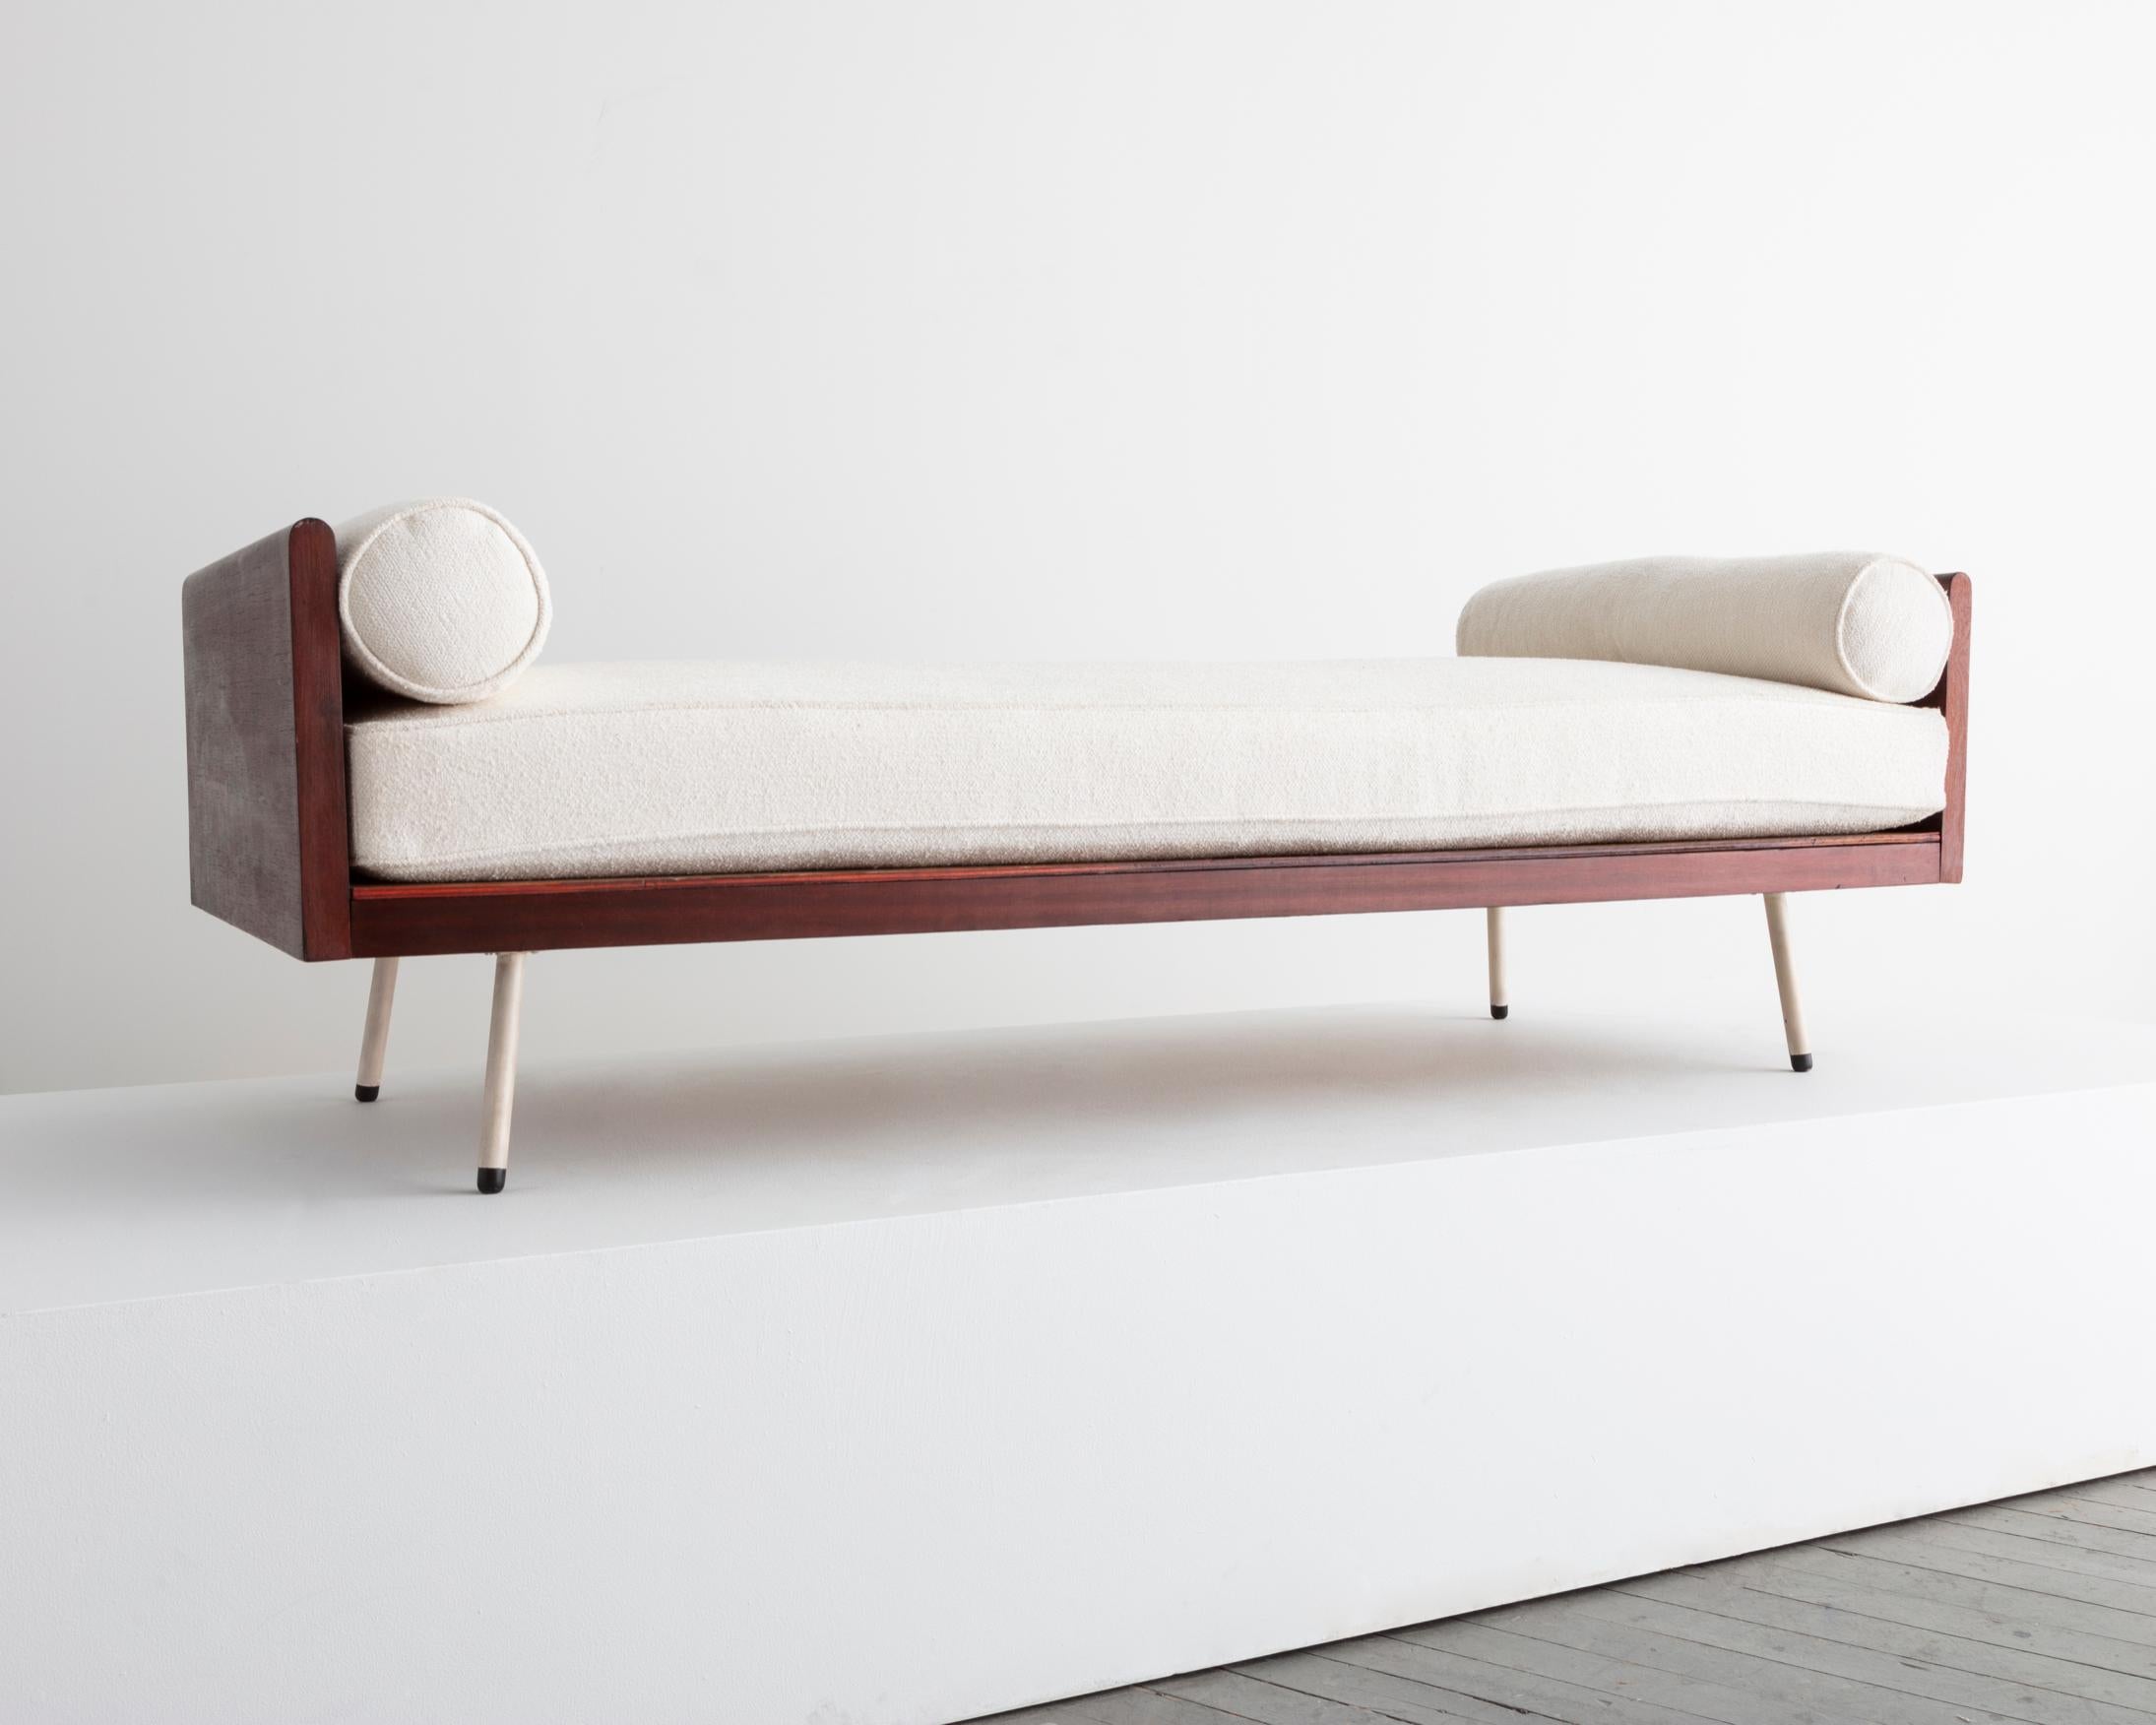 Daybed with wood frame, painted metal legs, and upholstered cushions. Designed by Joaquim Tenreiro for a private commission in Copacabana, Brazil, circa 1950. Reupholstered by Jouffre with bespoke 